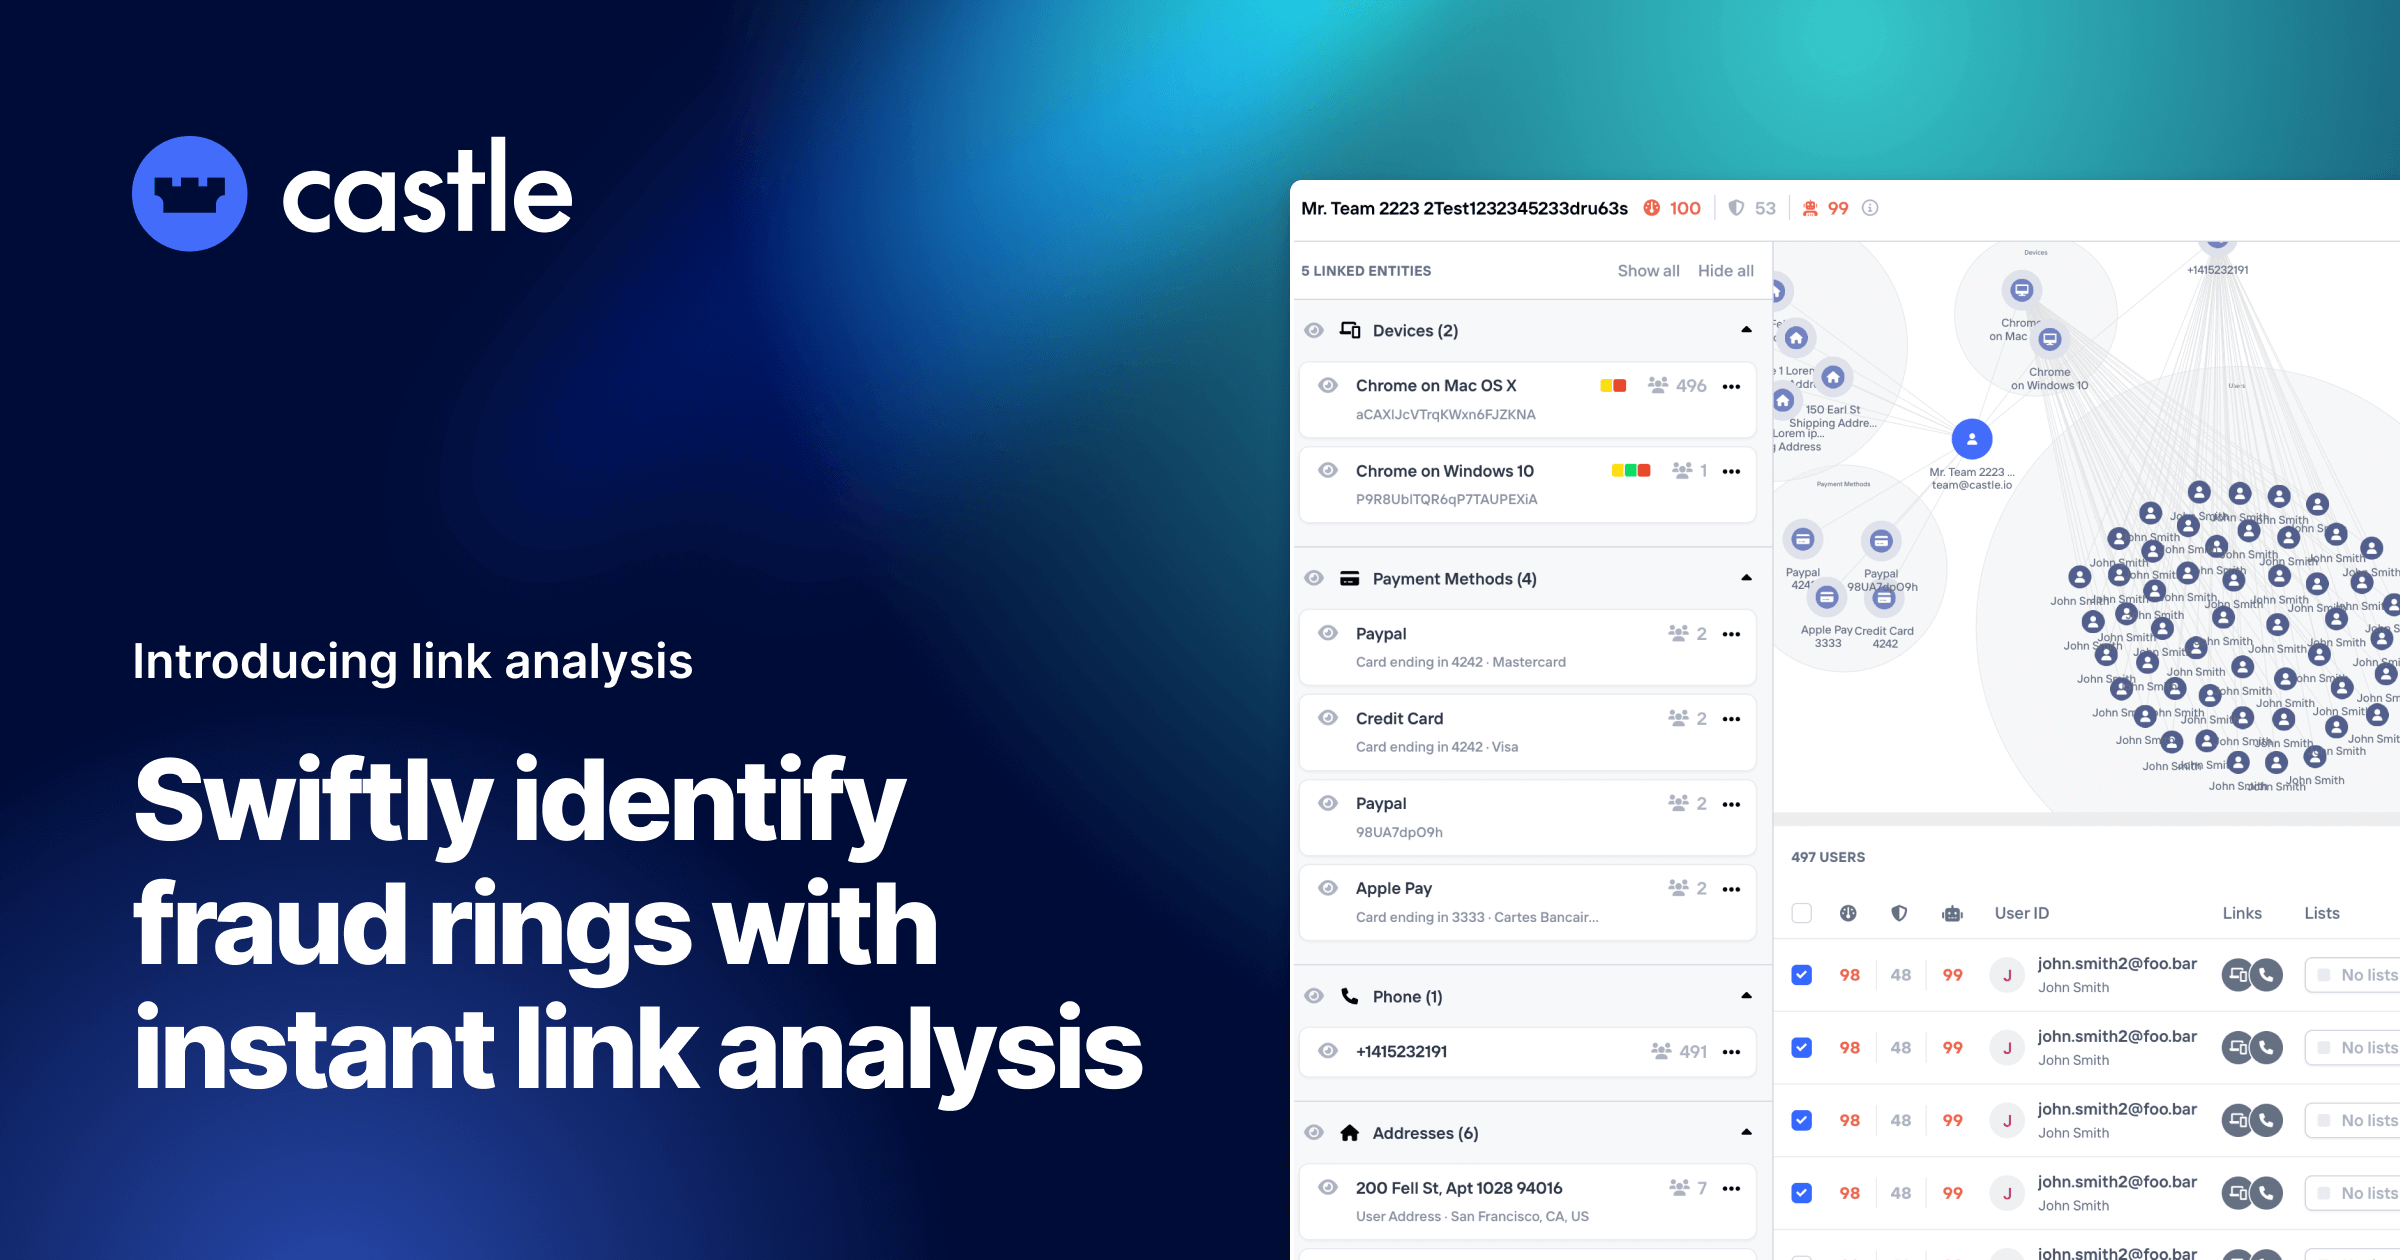 Swiftly identify fraud rings with instant link analysis